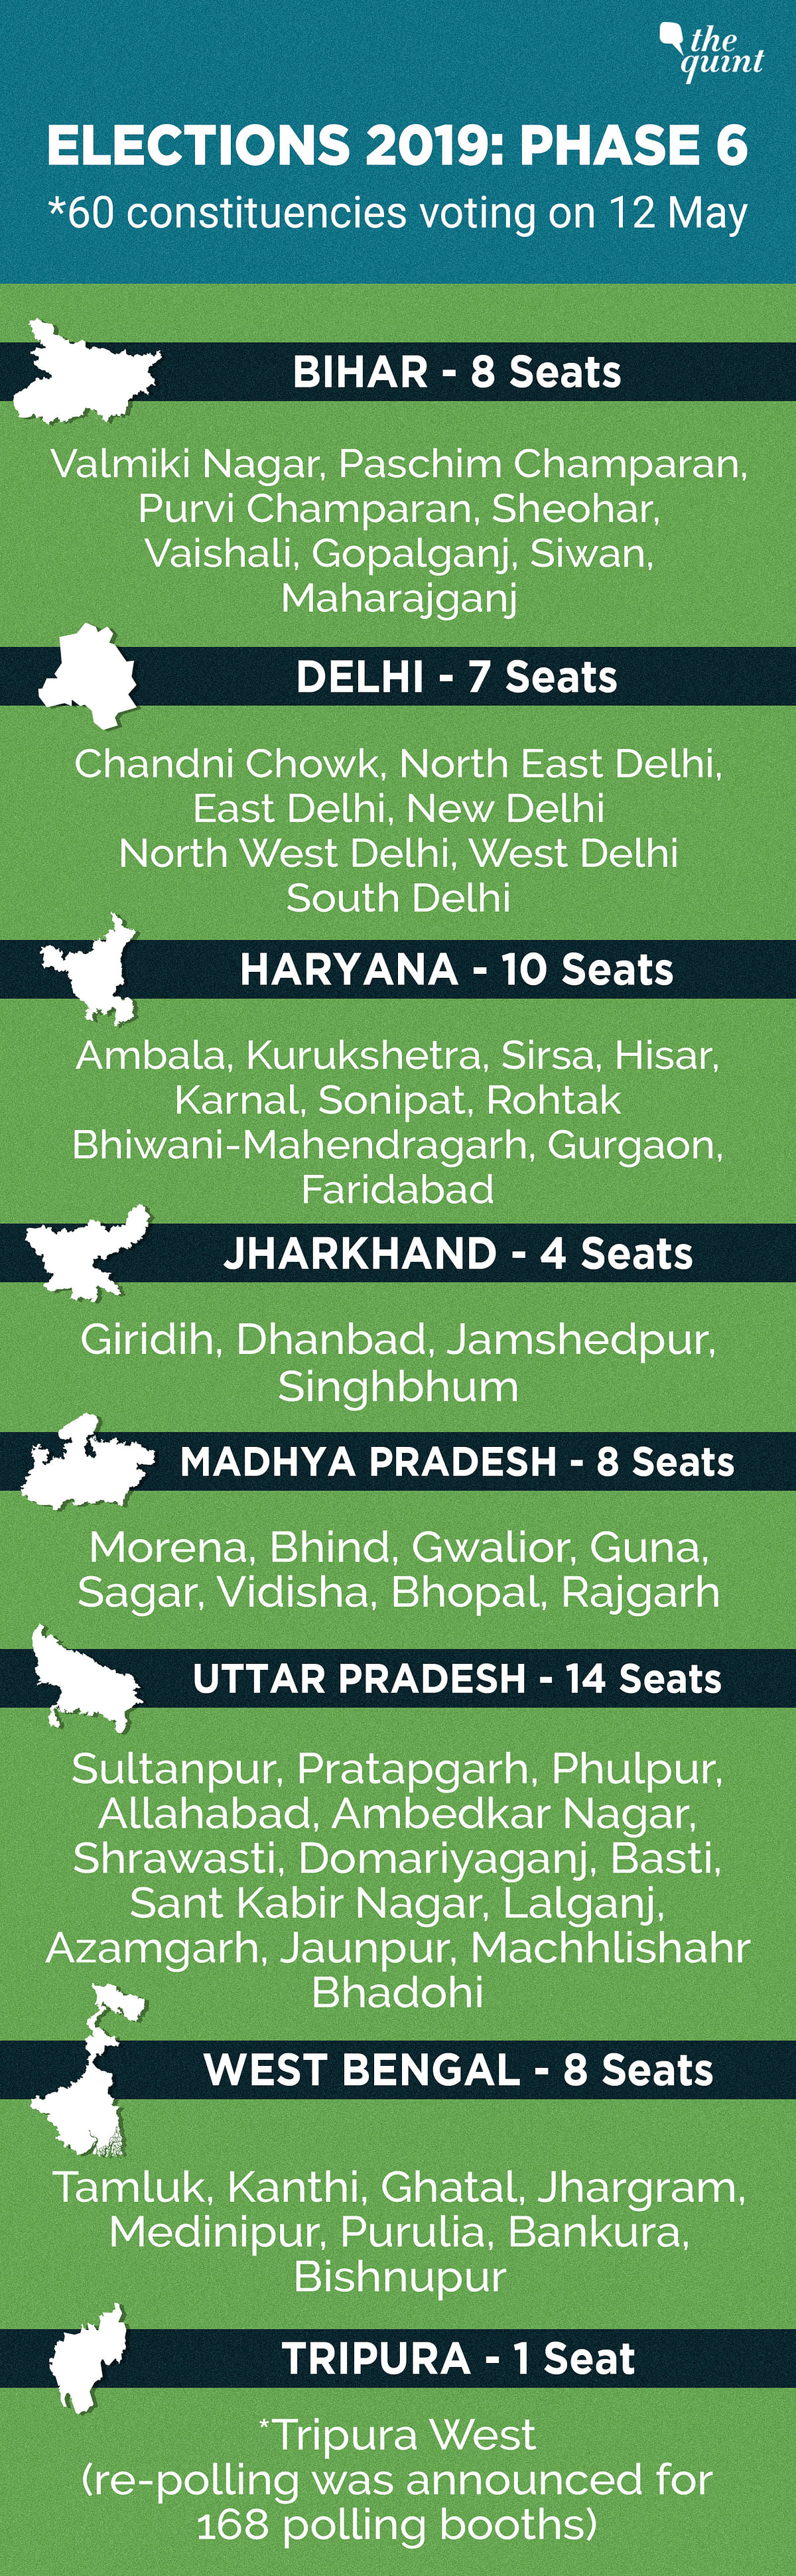 Here’s a full list of constituencies voting in the sixth phase of the Lok Sabha elections.